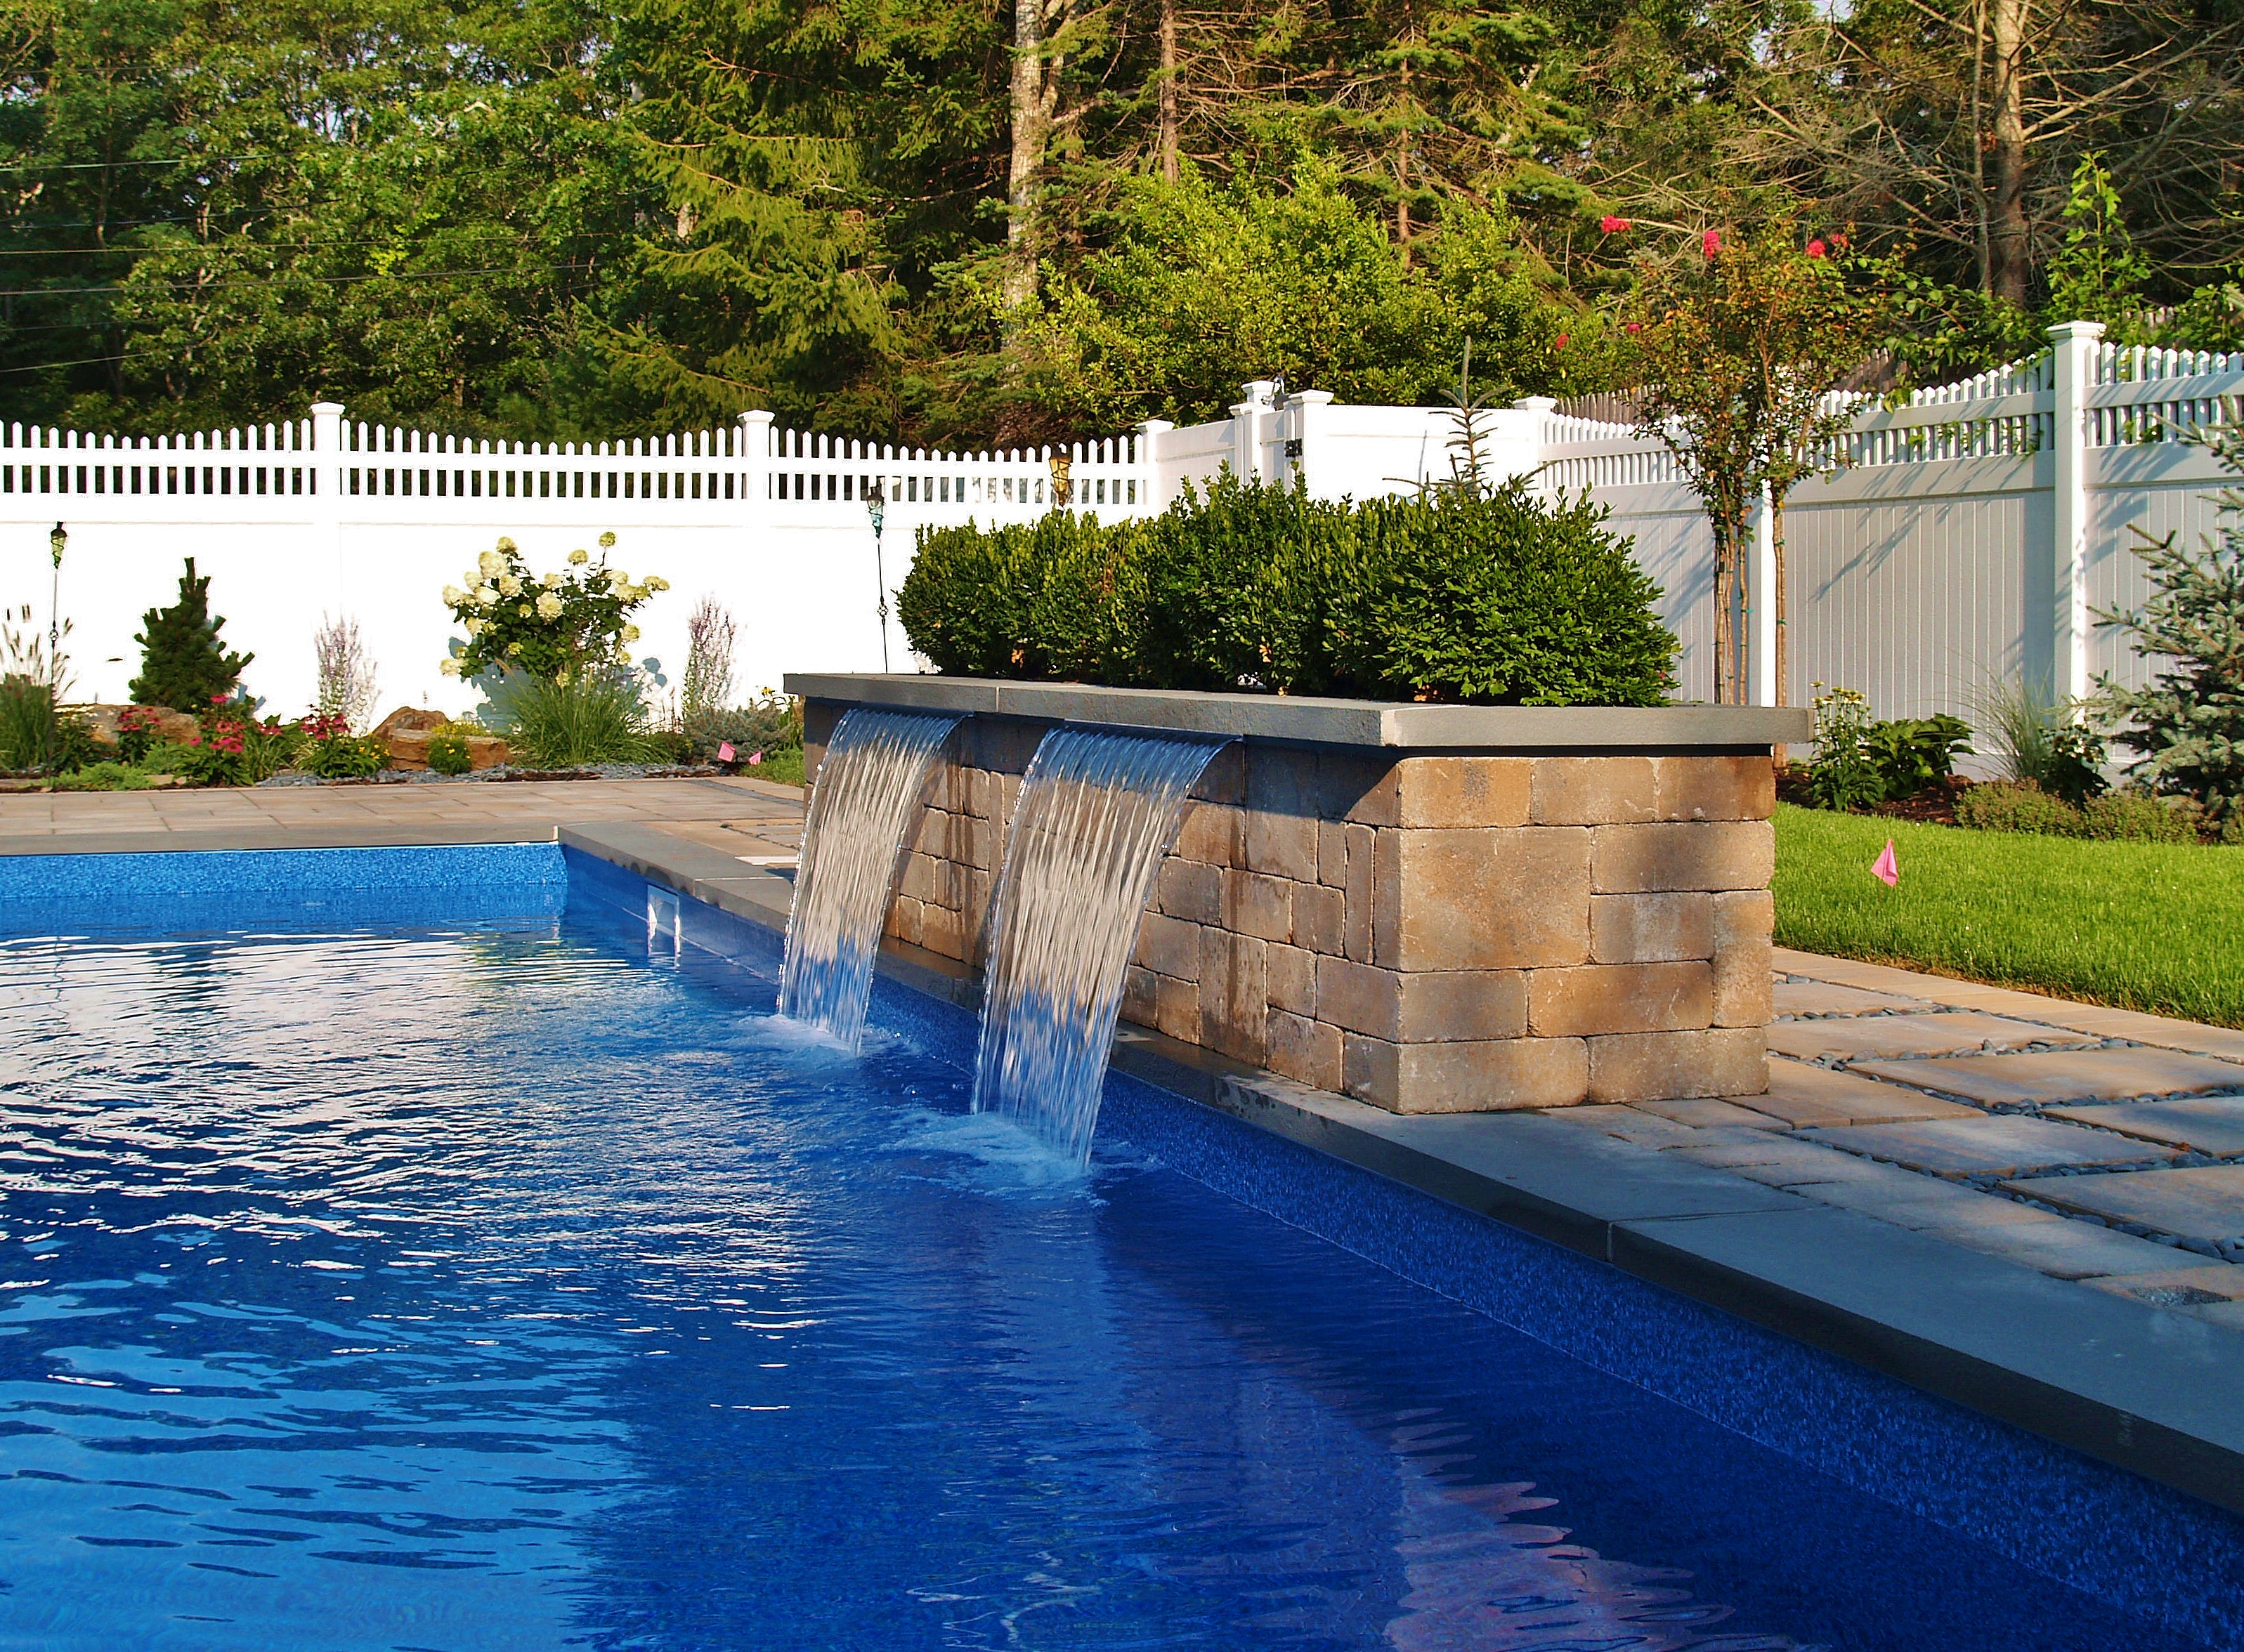 Swimming Pools & Outdoor Living Spaces